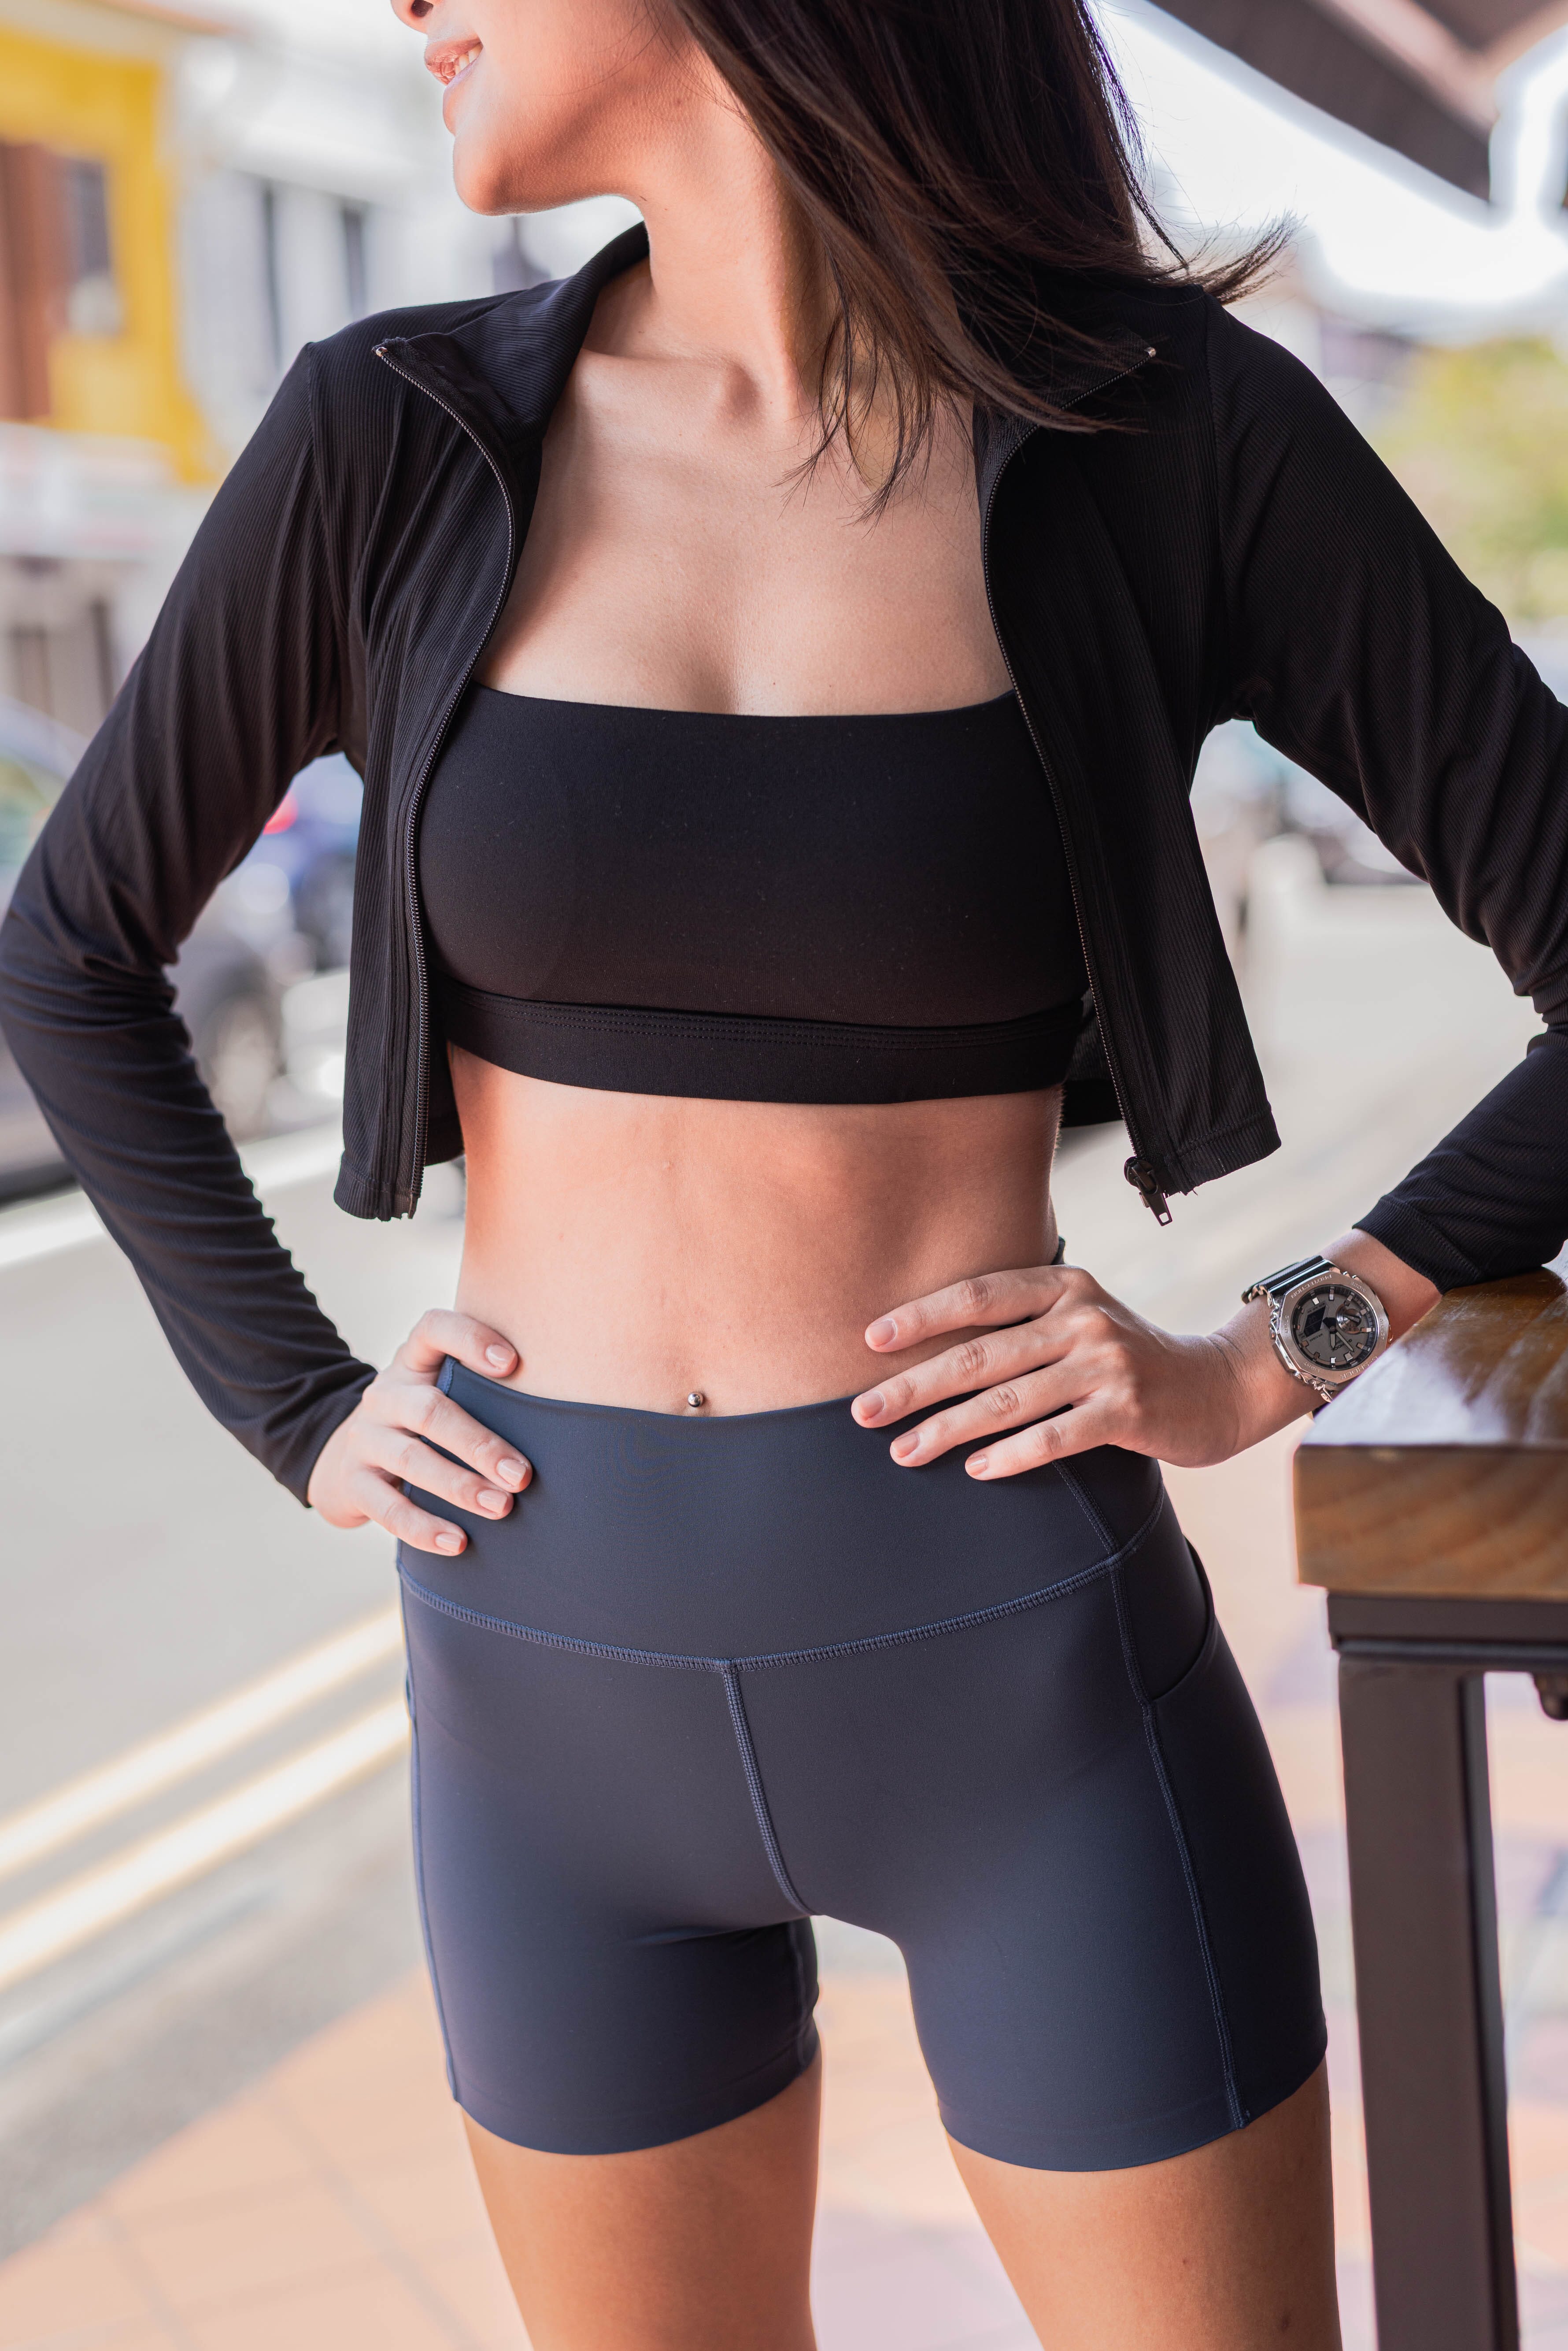 Kydra Athletics - No activewear wardrobe will be complete without a  longline sports bra. True to our Kydra classic sports bras, the Ava  Longline is undeniably soft, stretchy, comfortable, and a must-have.